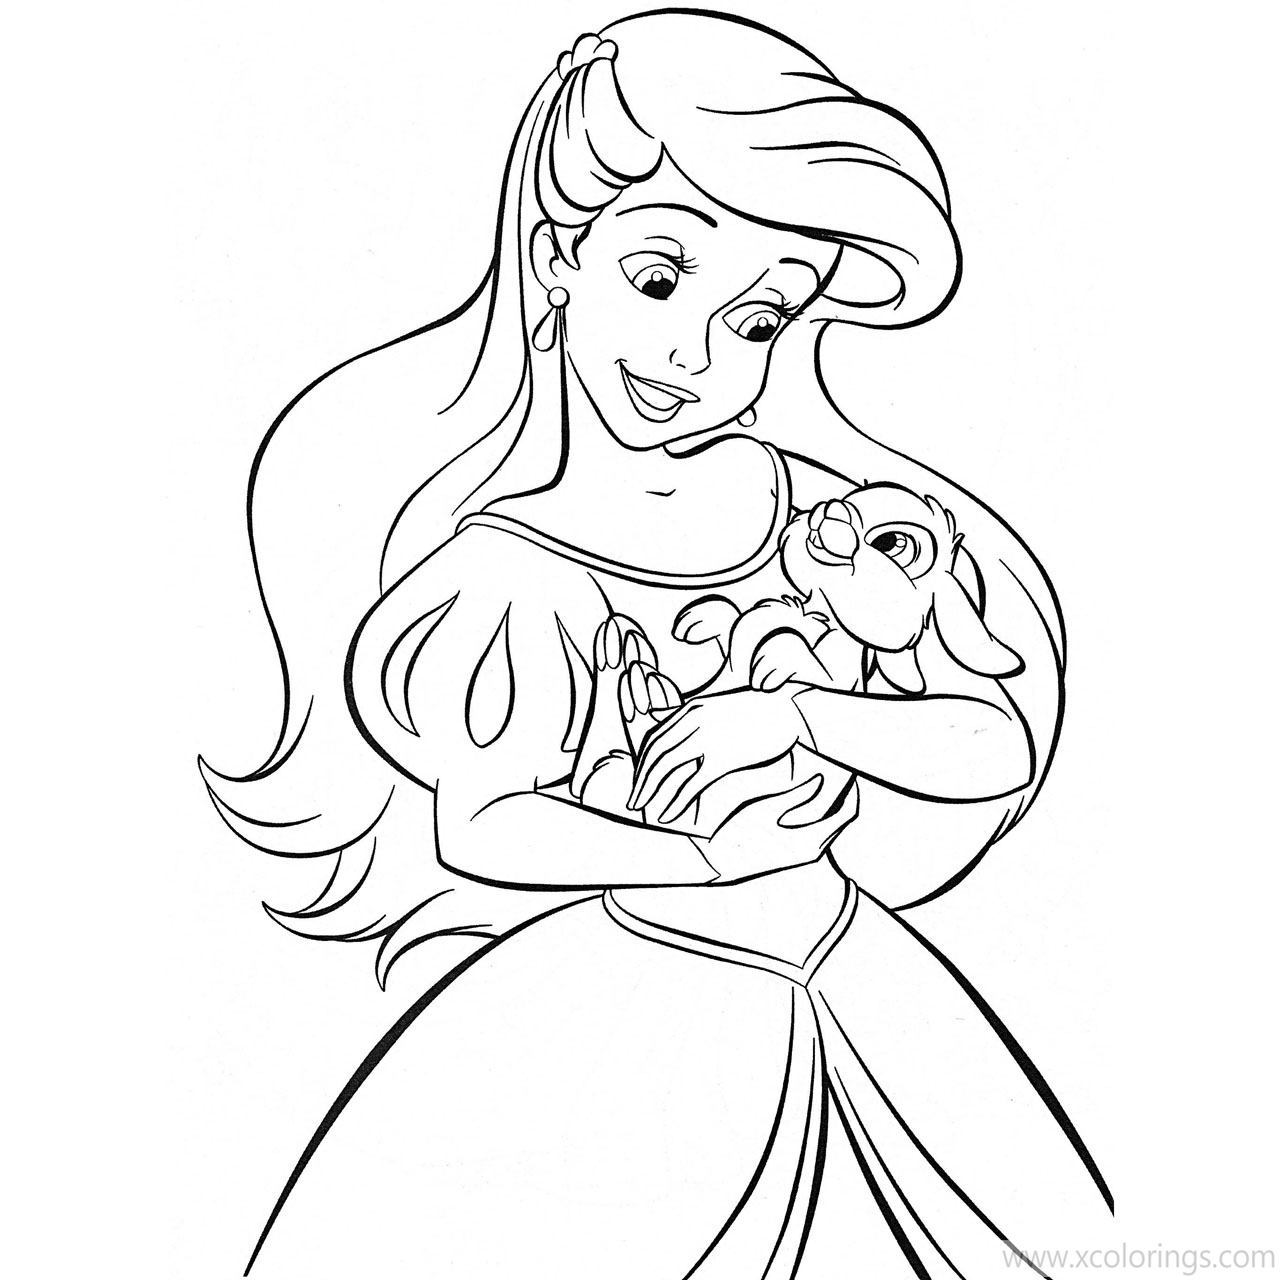 Free Disney Princess Easter Coloring Pages Ariel with A Bunny printable